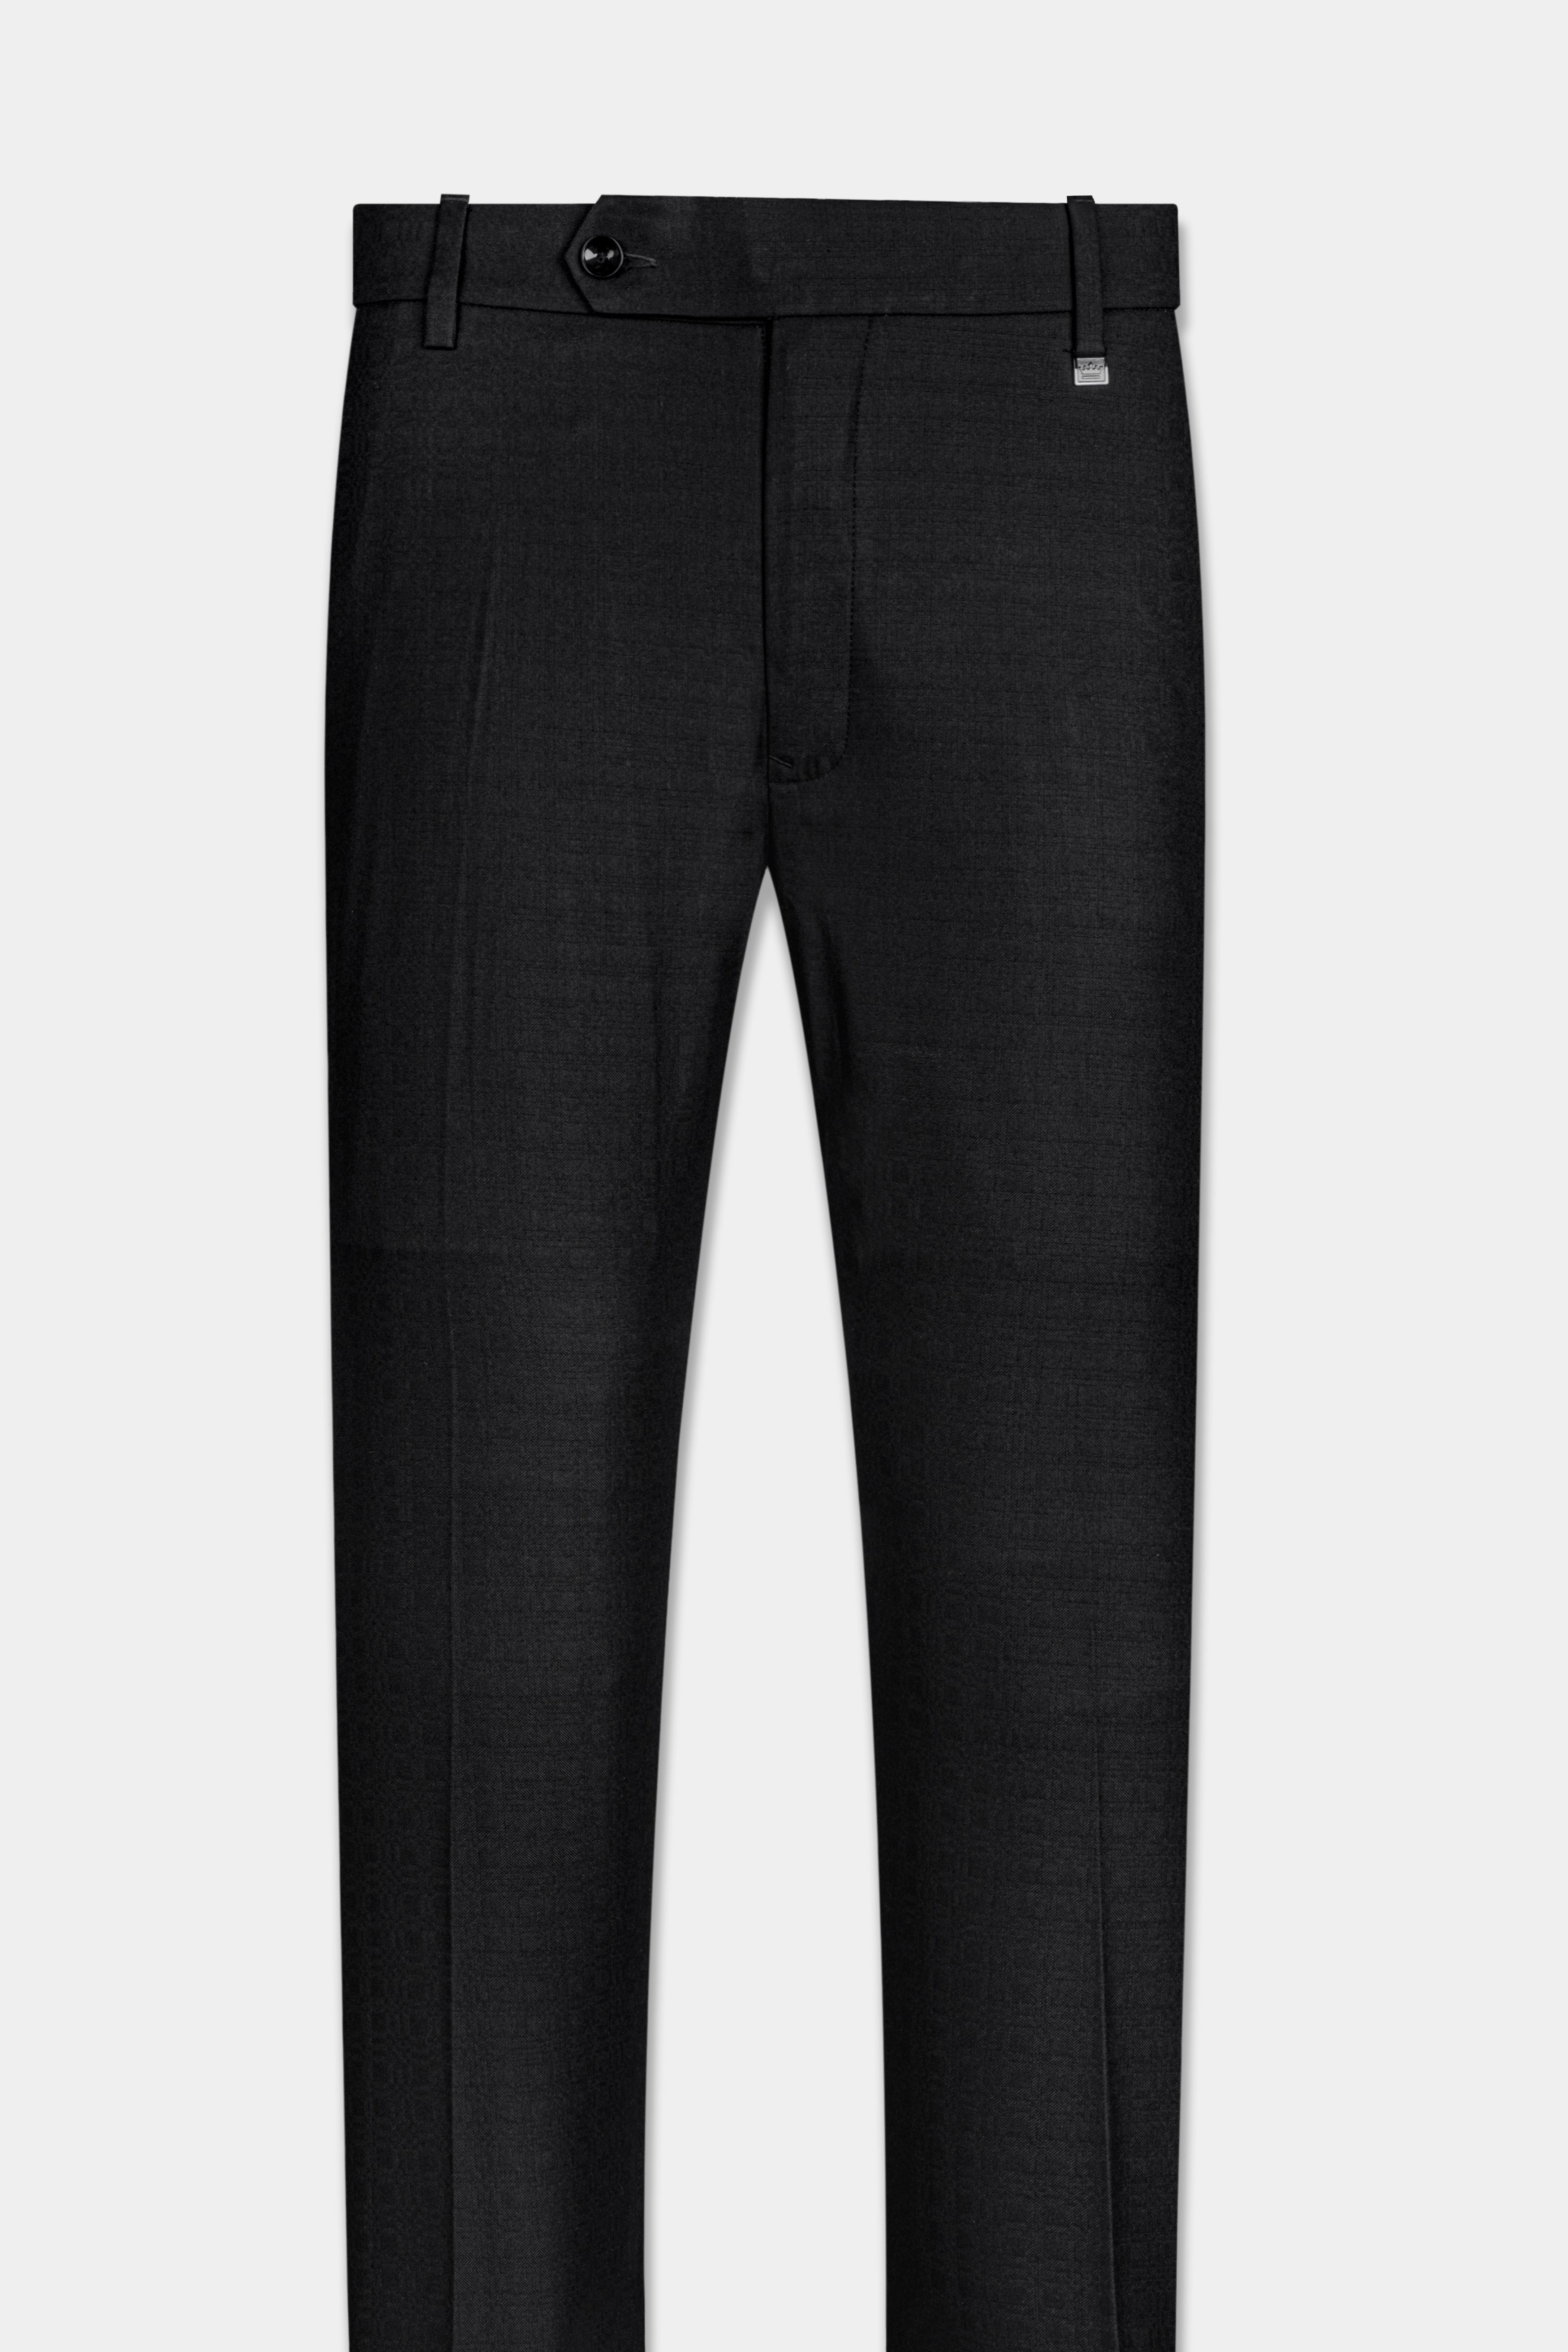 Zegna Tailored Wool Trousers - Farfetch